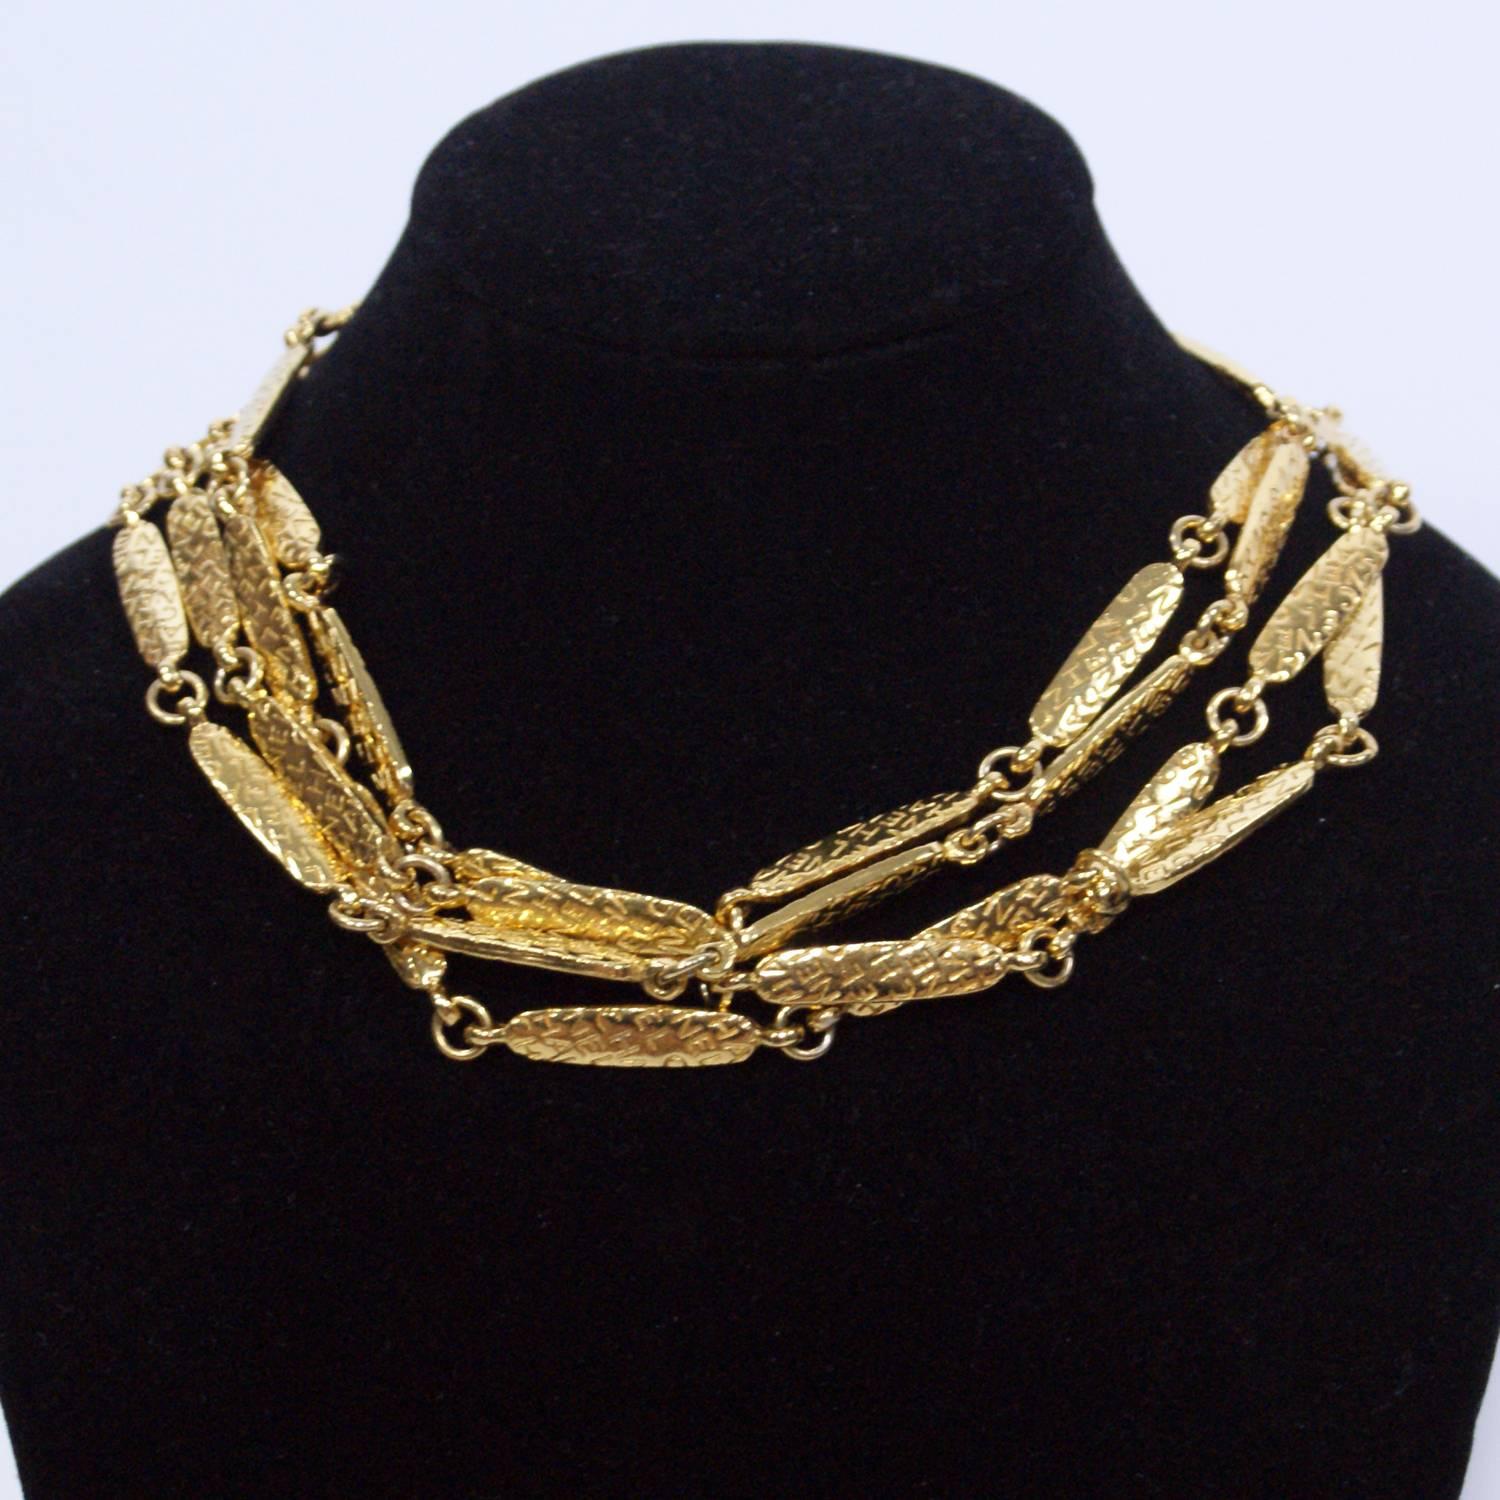 Chanel Vintage Golden Link Necklace In Good Condition For Sale In Narberth, PA